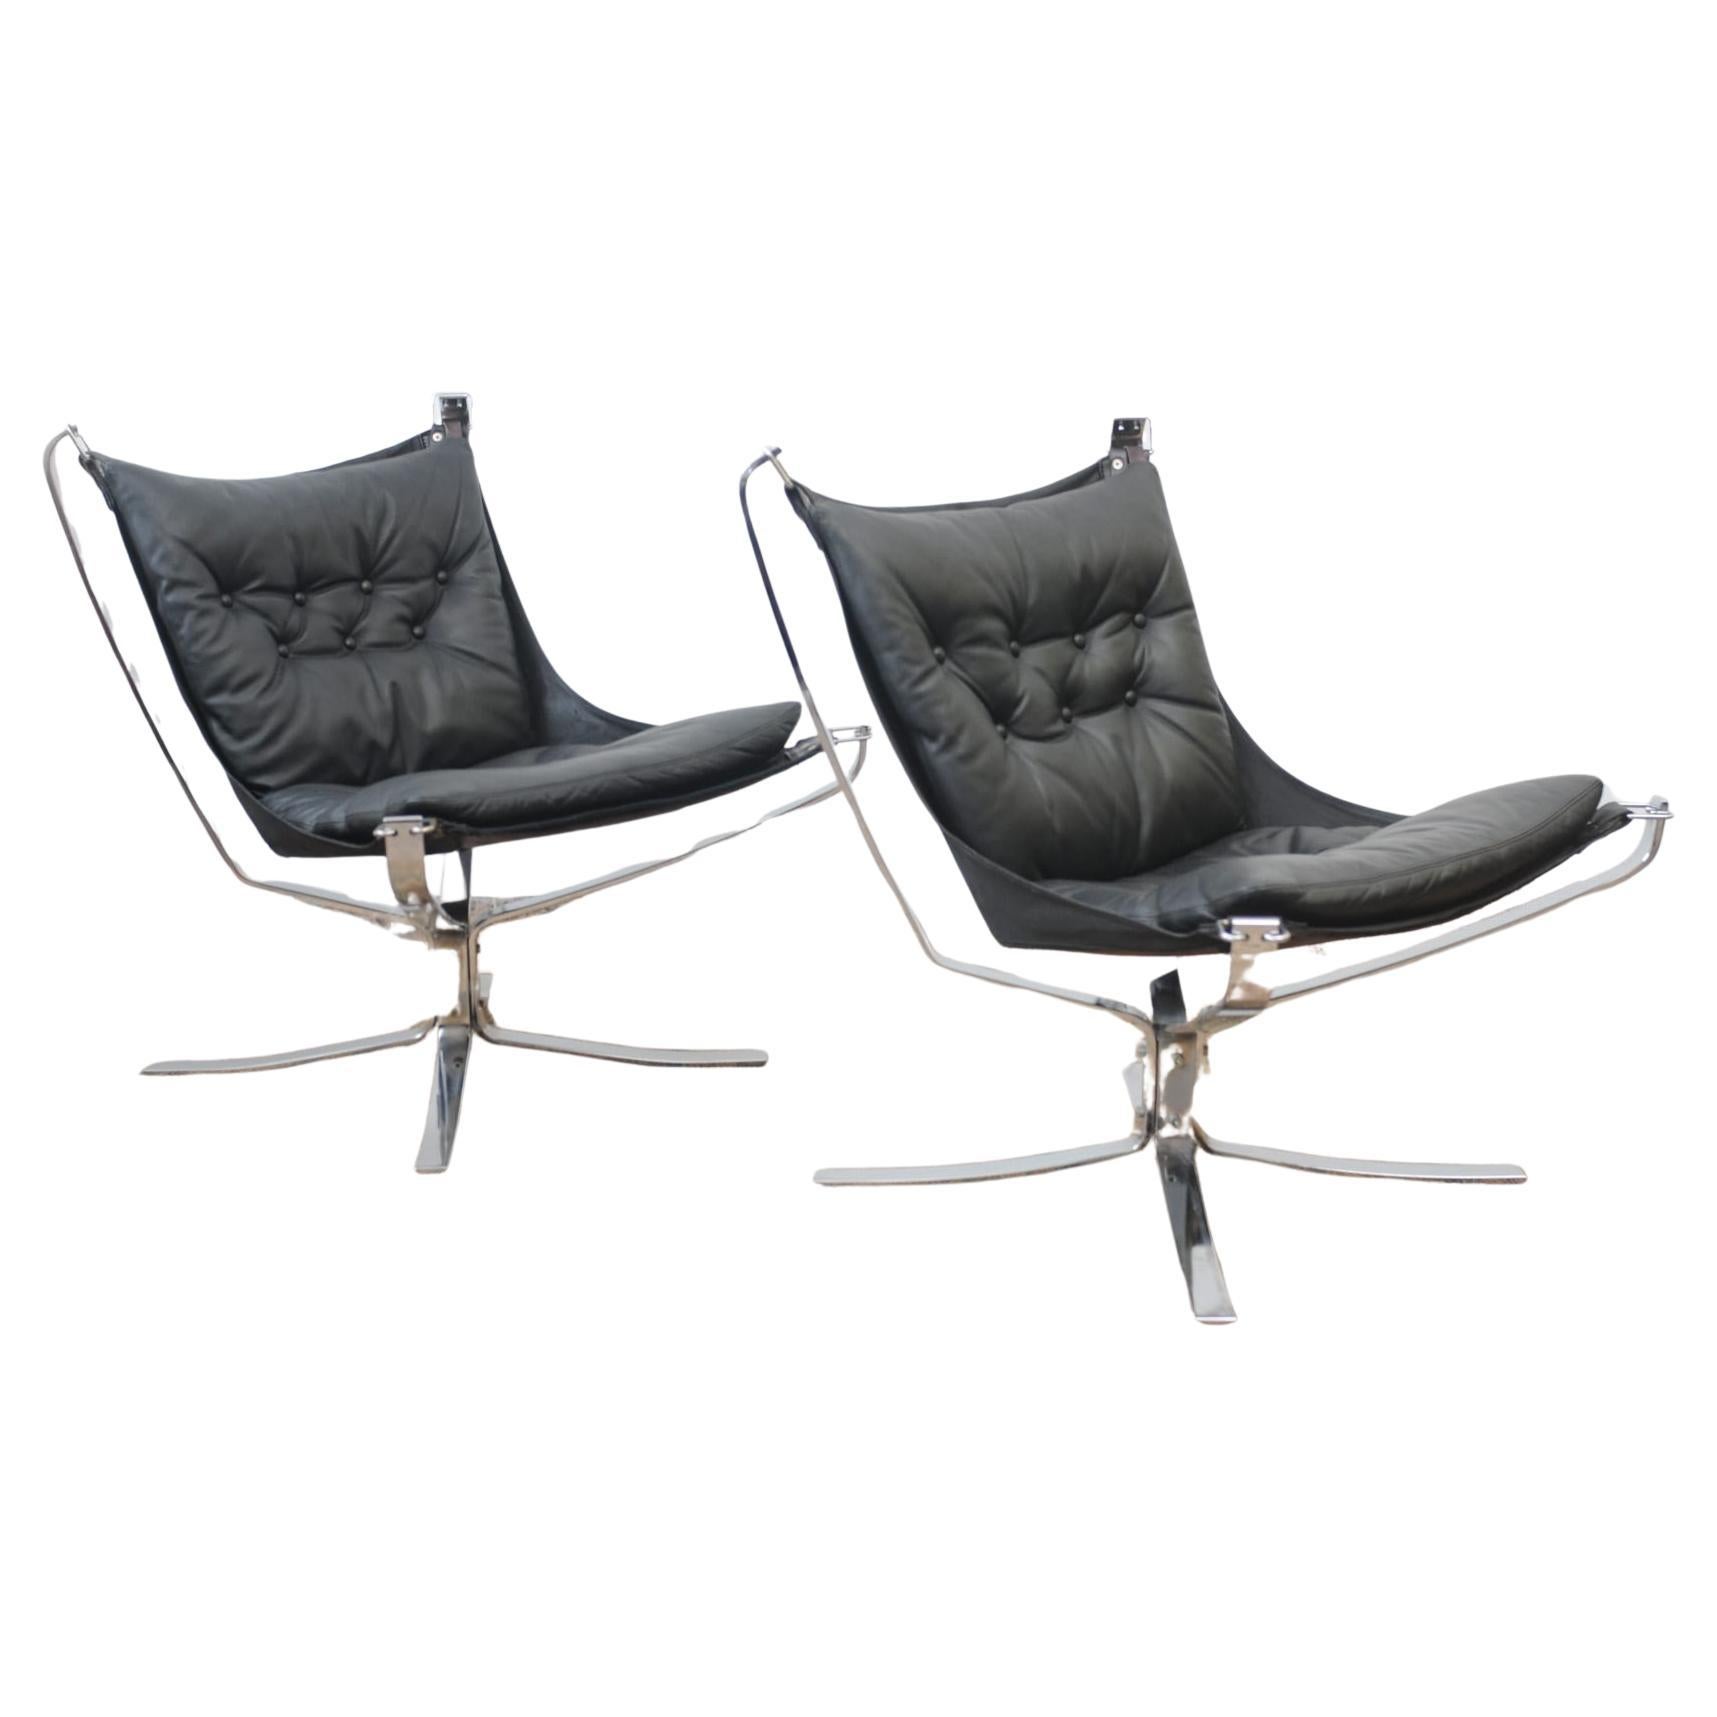 1970s Falcon Lounge Chrome Framed Chairs by Sigurd Ressell